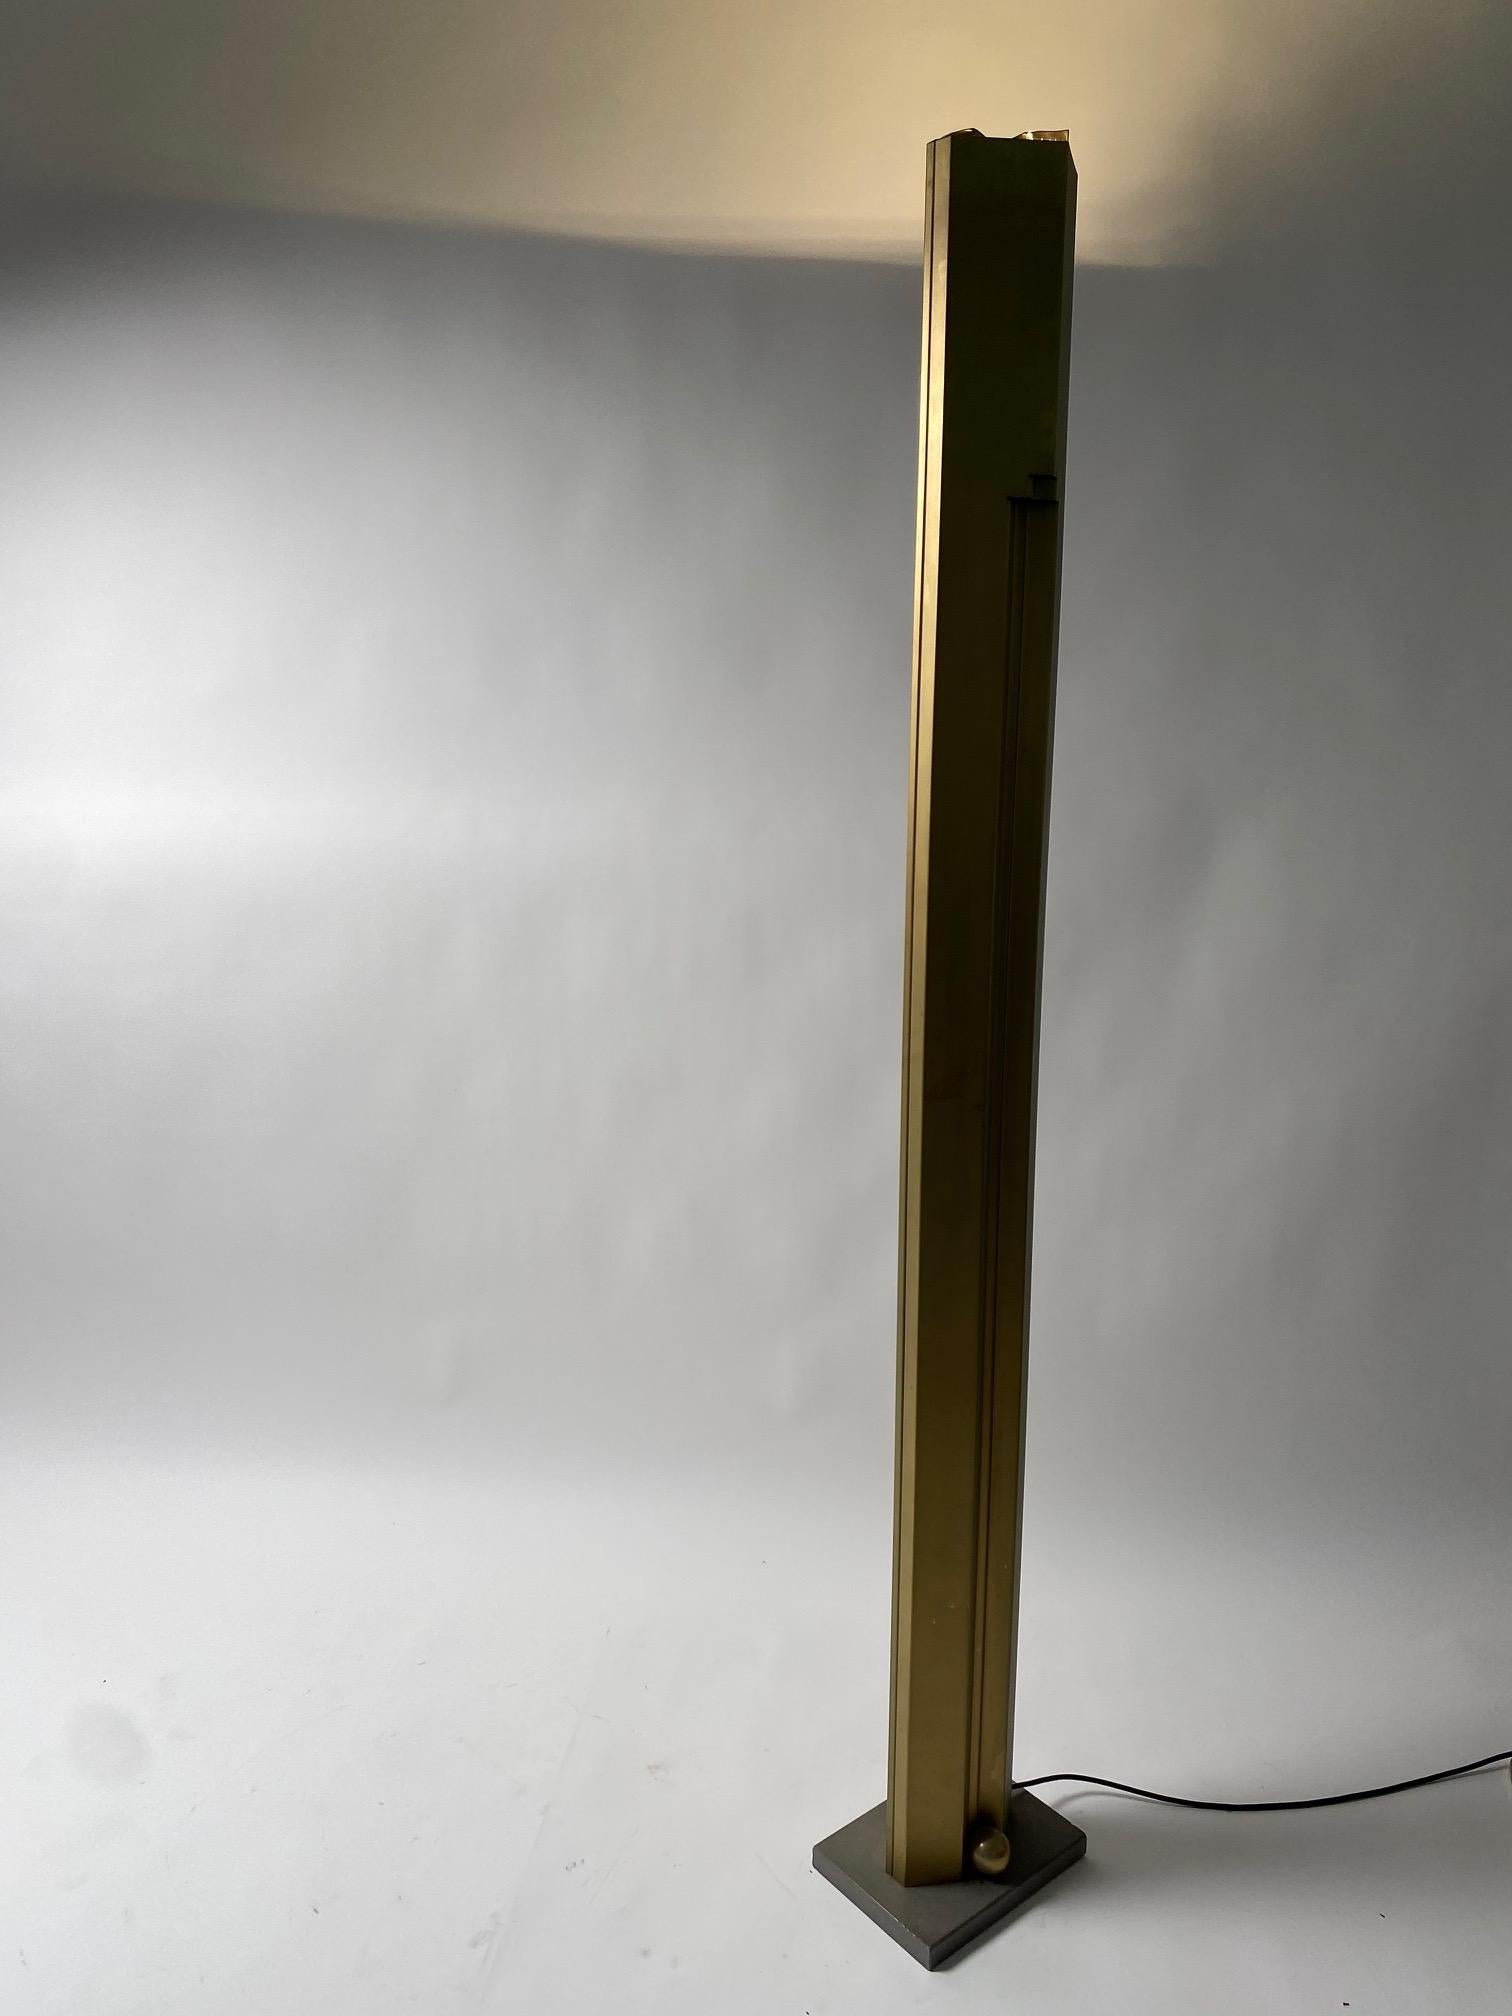 Totem Floor Lamp by Kazuhide Takahama for Sirrah, Italy 1982 - Old version For Sale 8